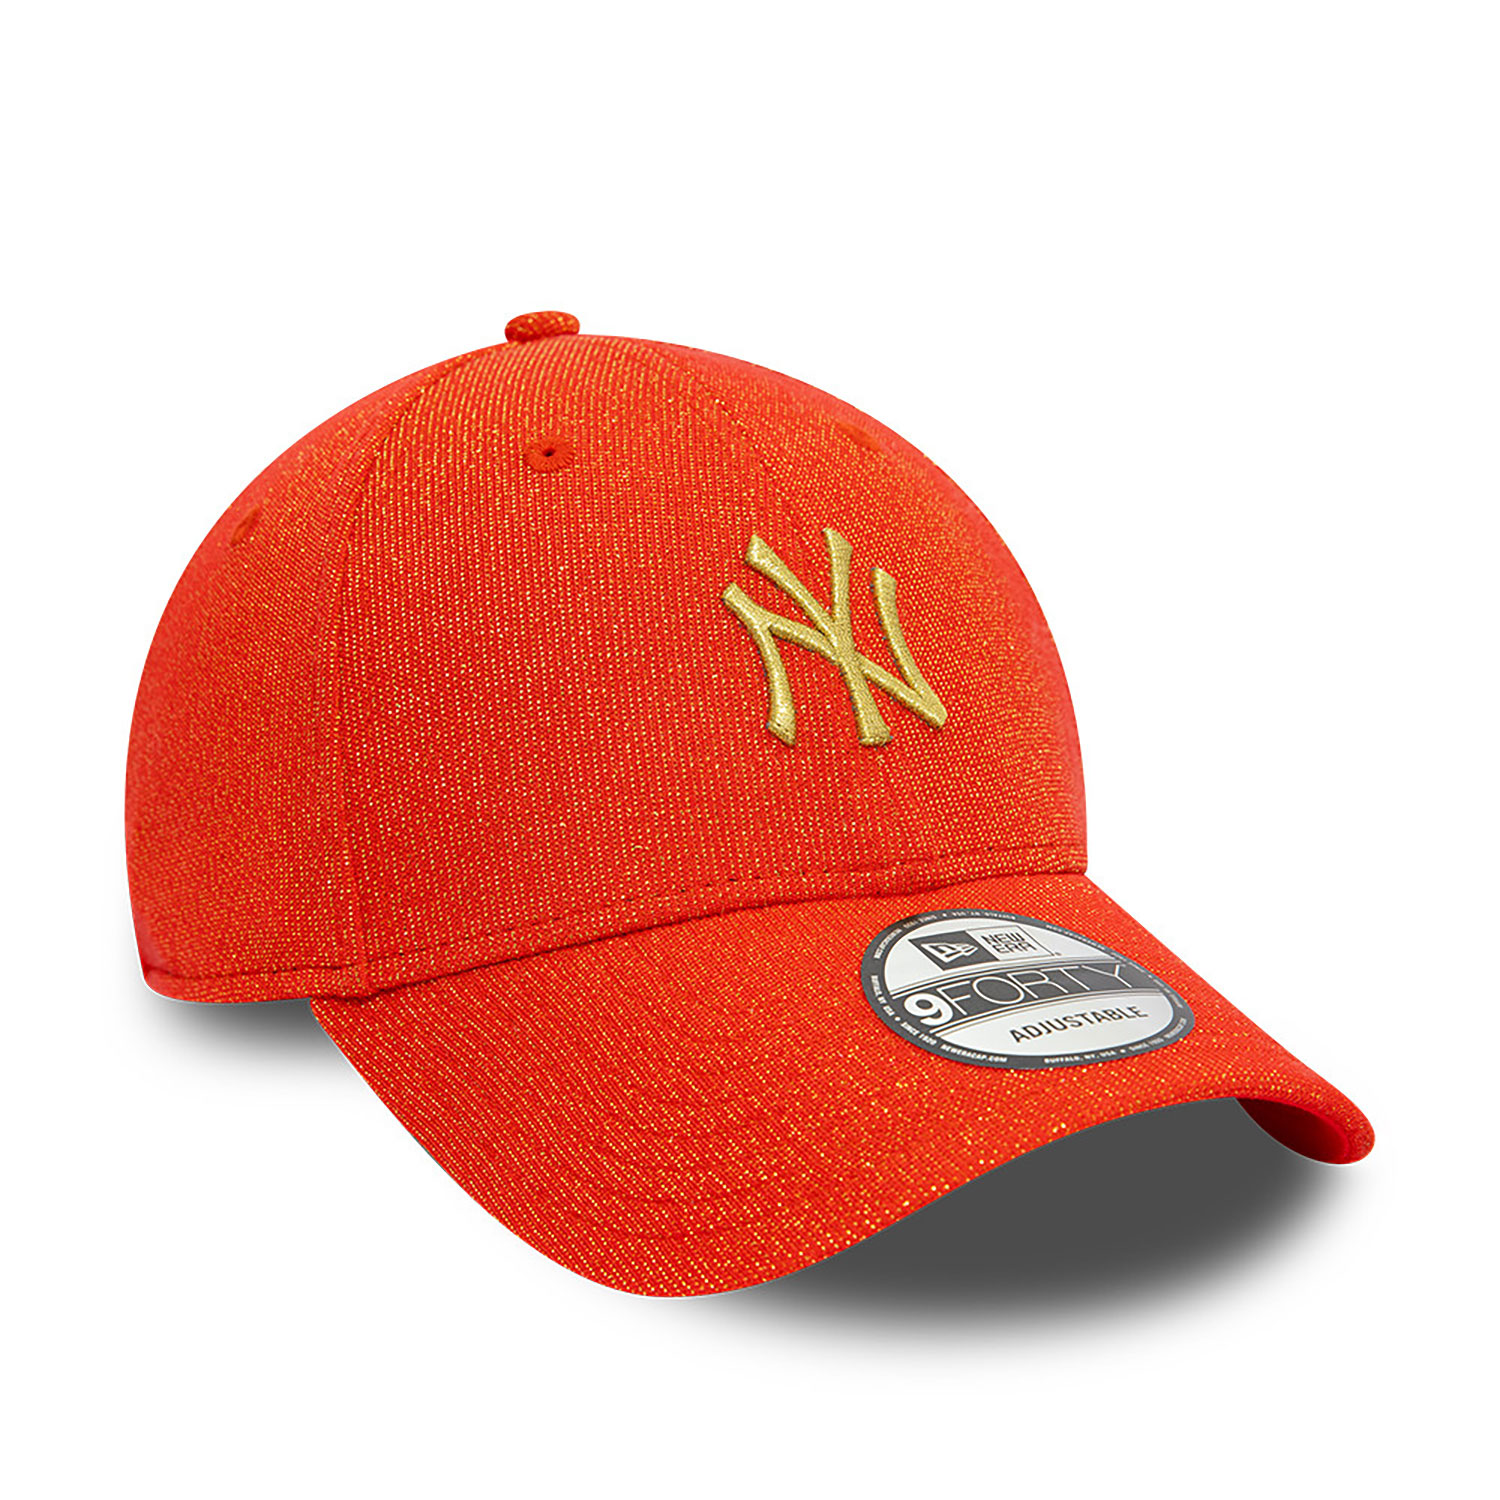 New York Yankees Sparkle Lunar New Year Red 9FORTY Adjustable Cap